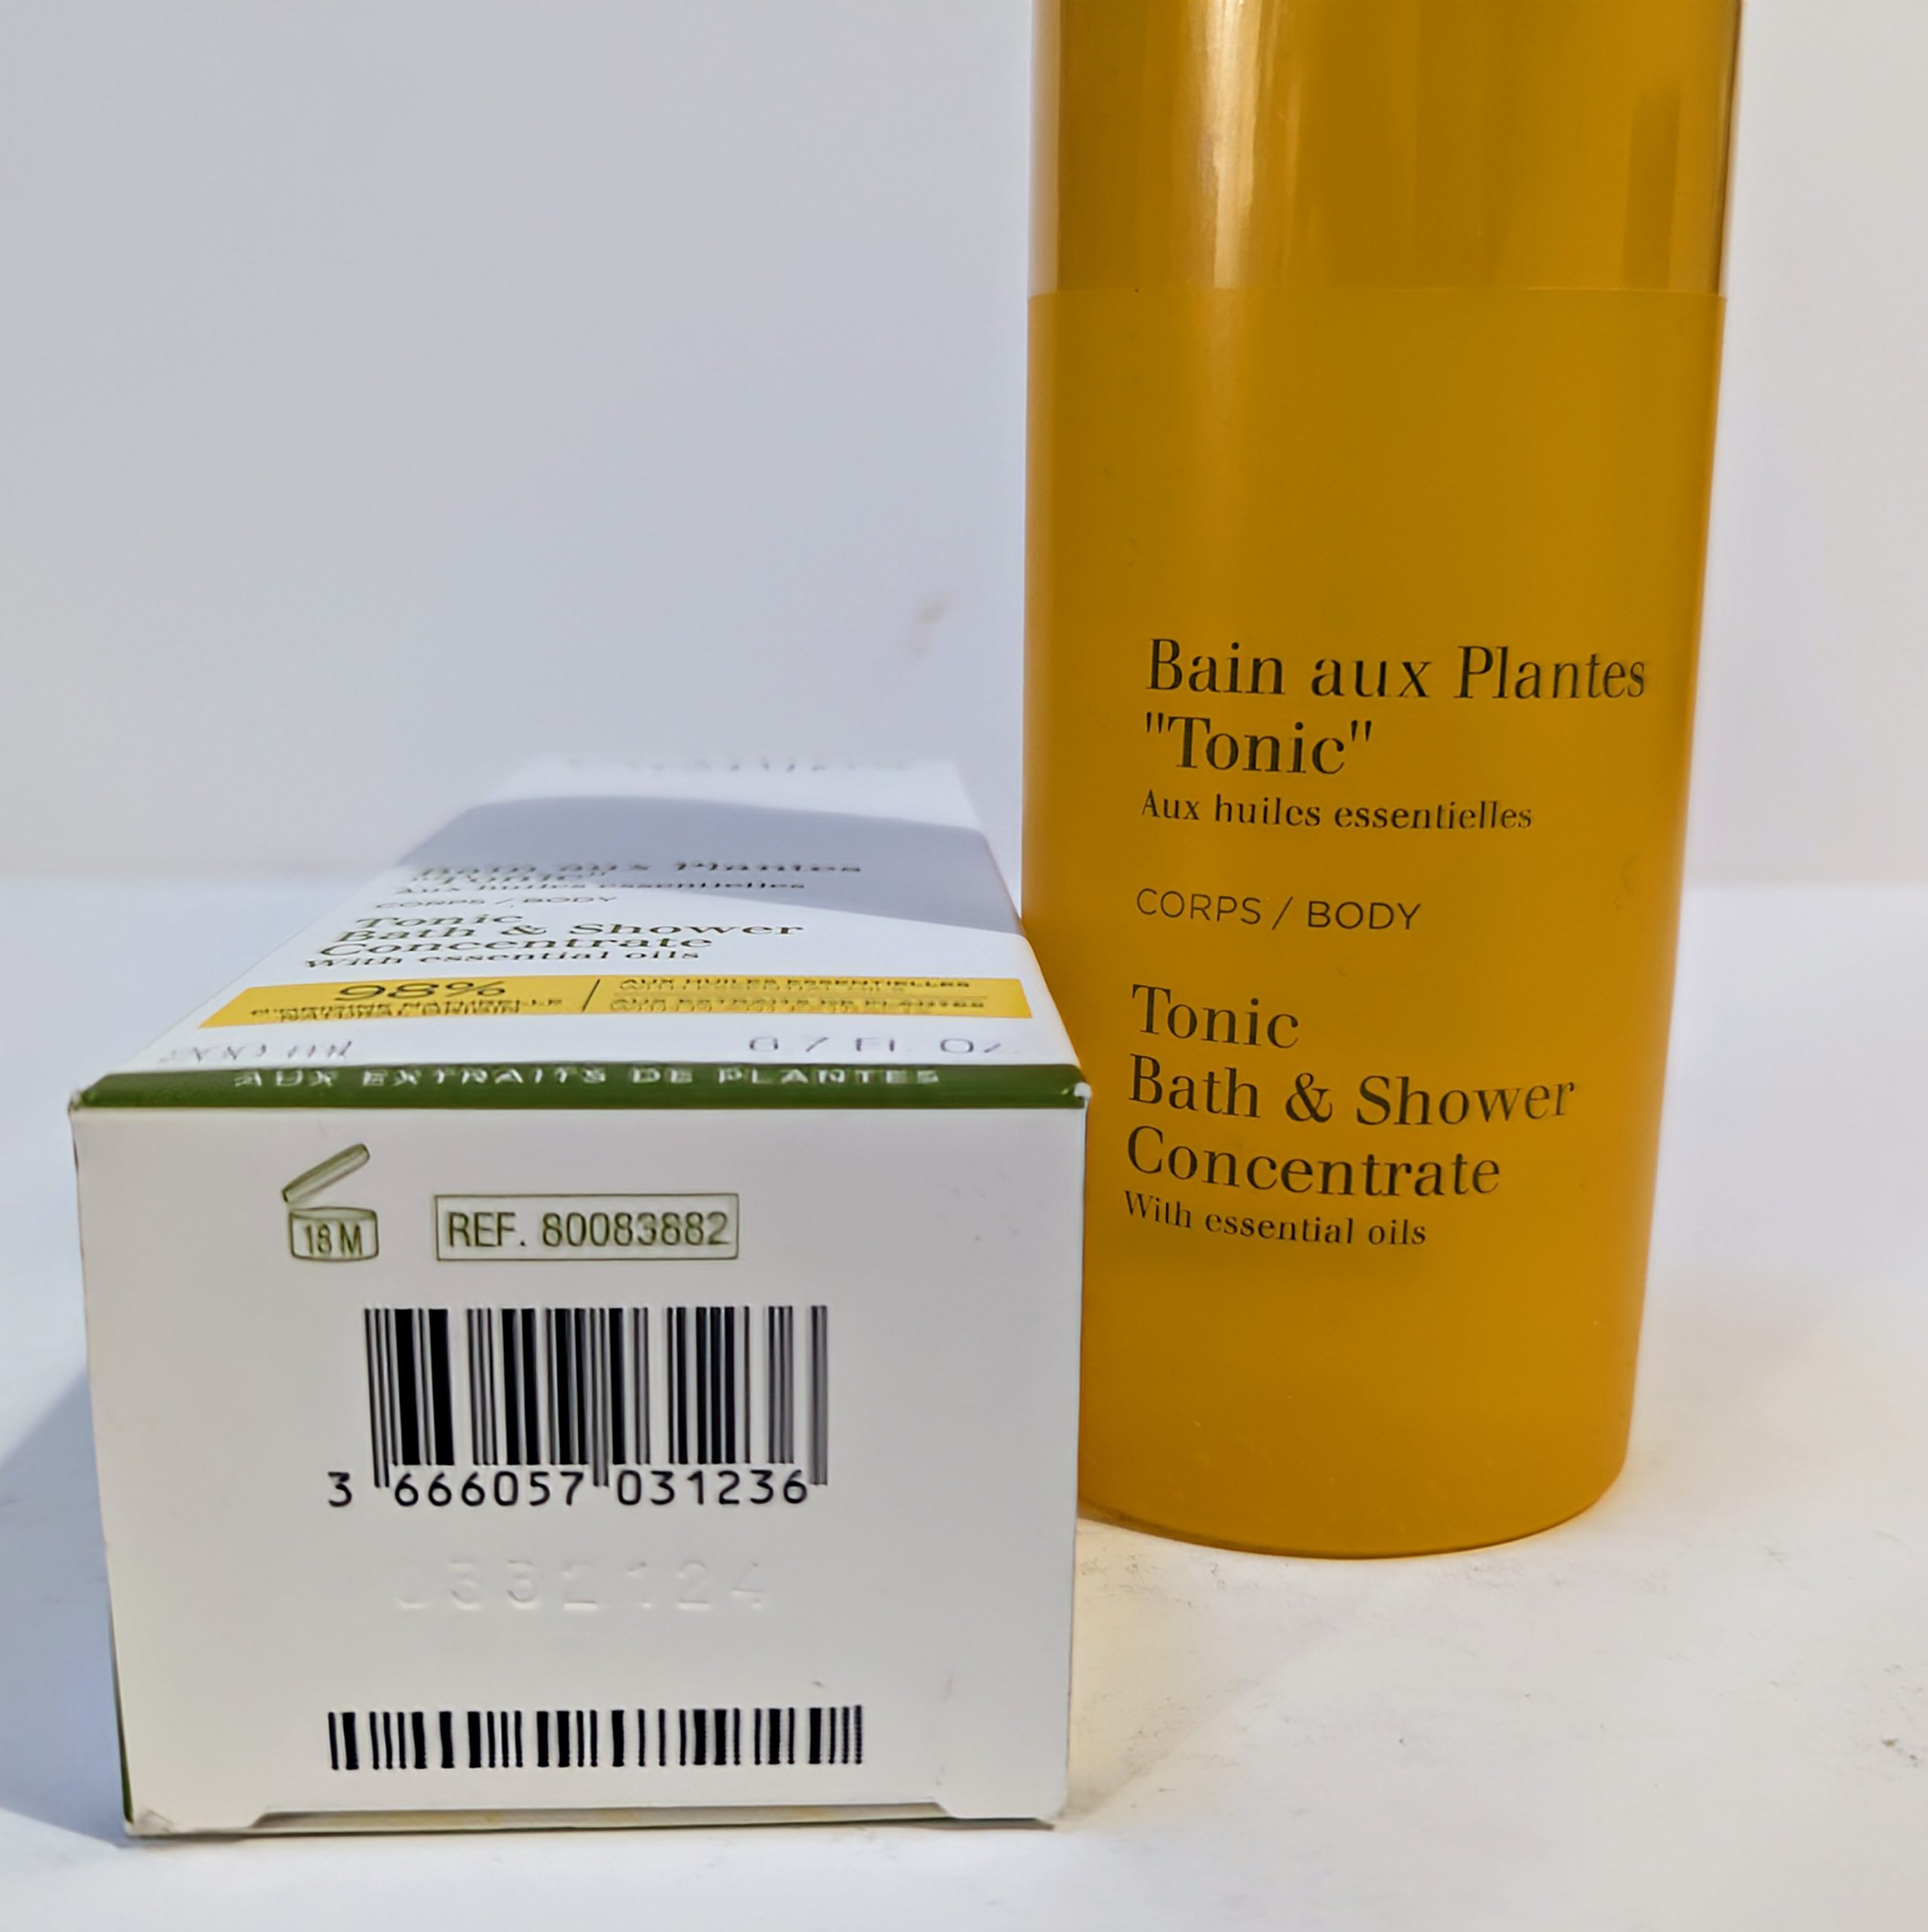 An image of a white box with product information next to a cylindrical yellow bottle labeled “Bain aux Plantes ‘Tonic’ – Tonic Bath & Shower Concentrate with essential oils.